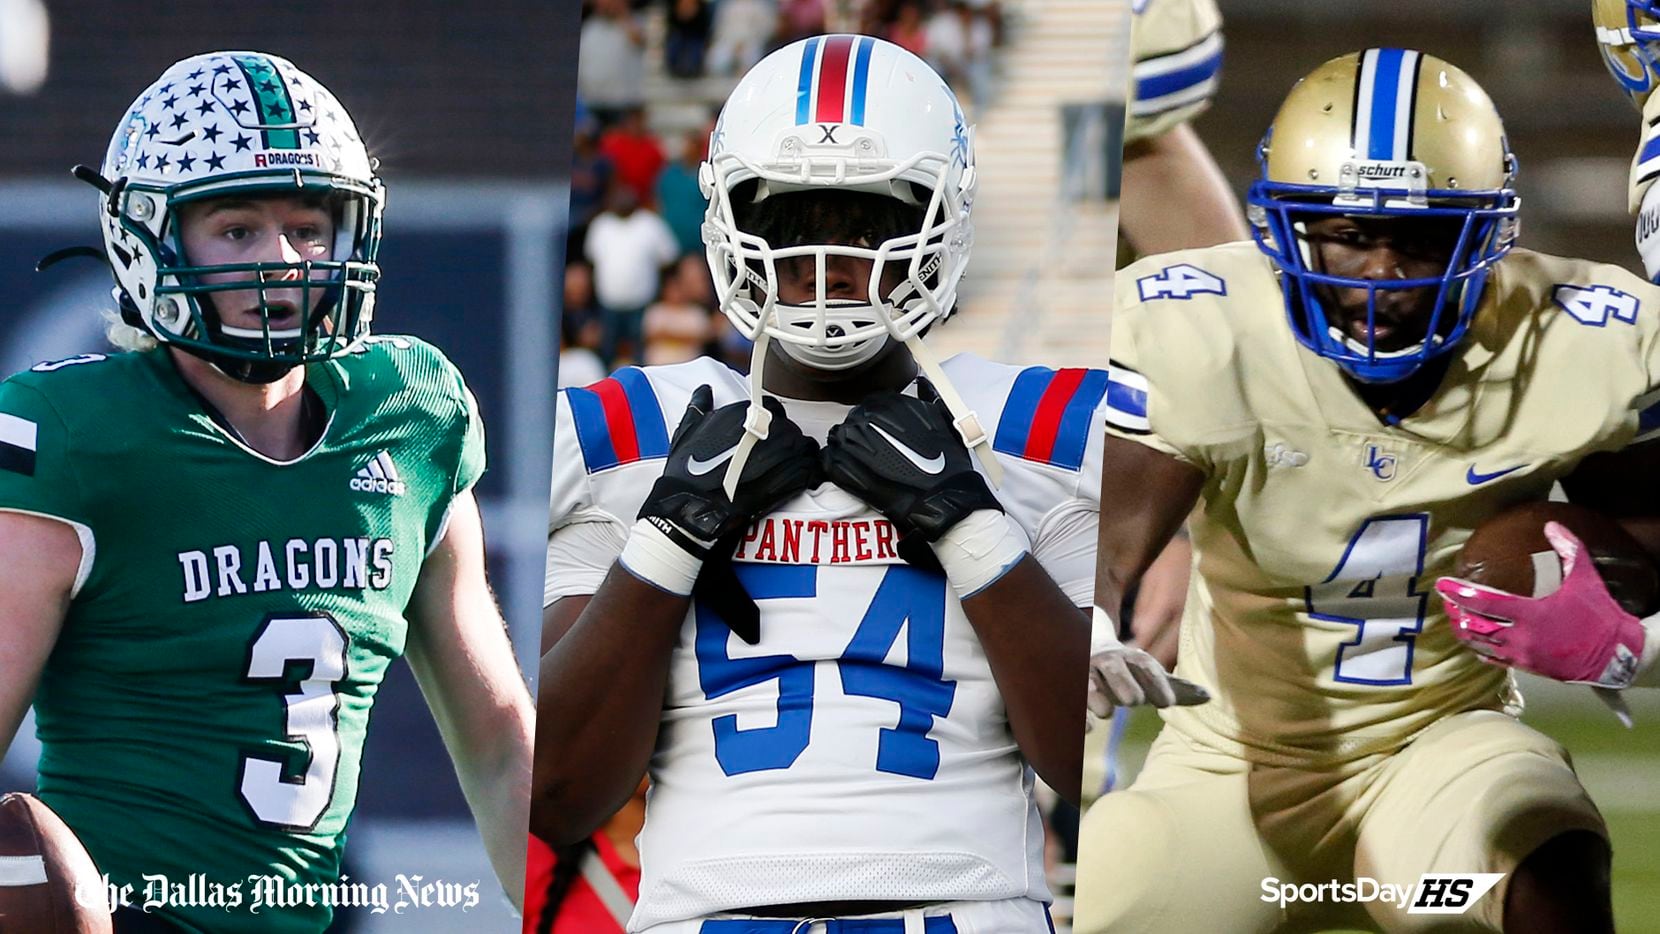 From left to right: Southlake Carroll's Quinn Ewers, Duncanville's Savion Byrd and Garland...